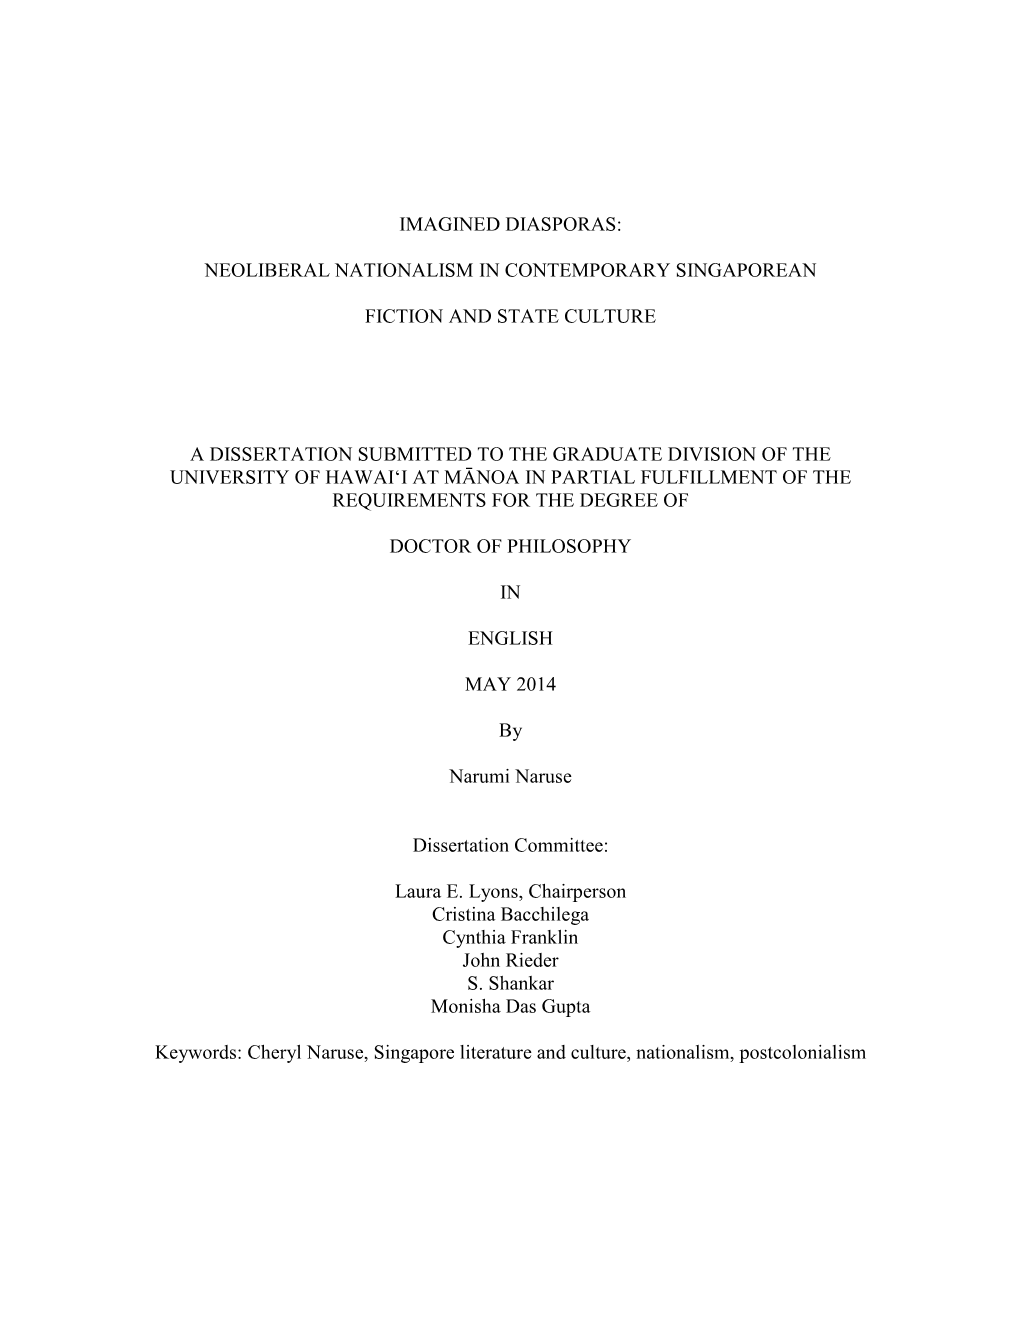 Neoliberal Nationalism in Contemporary Singaporean Fiction and State Culture a Dissertation Submitted to Th